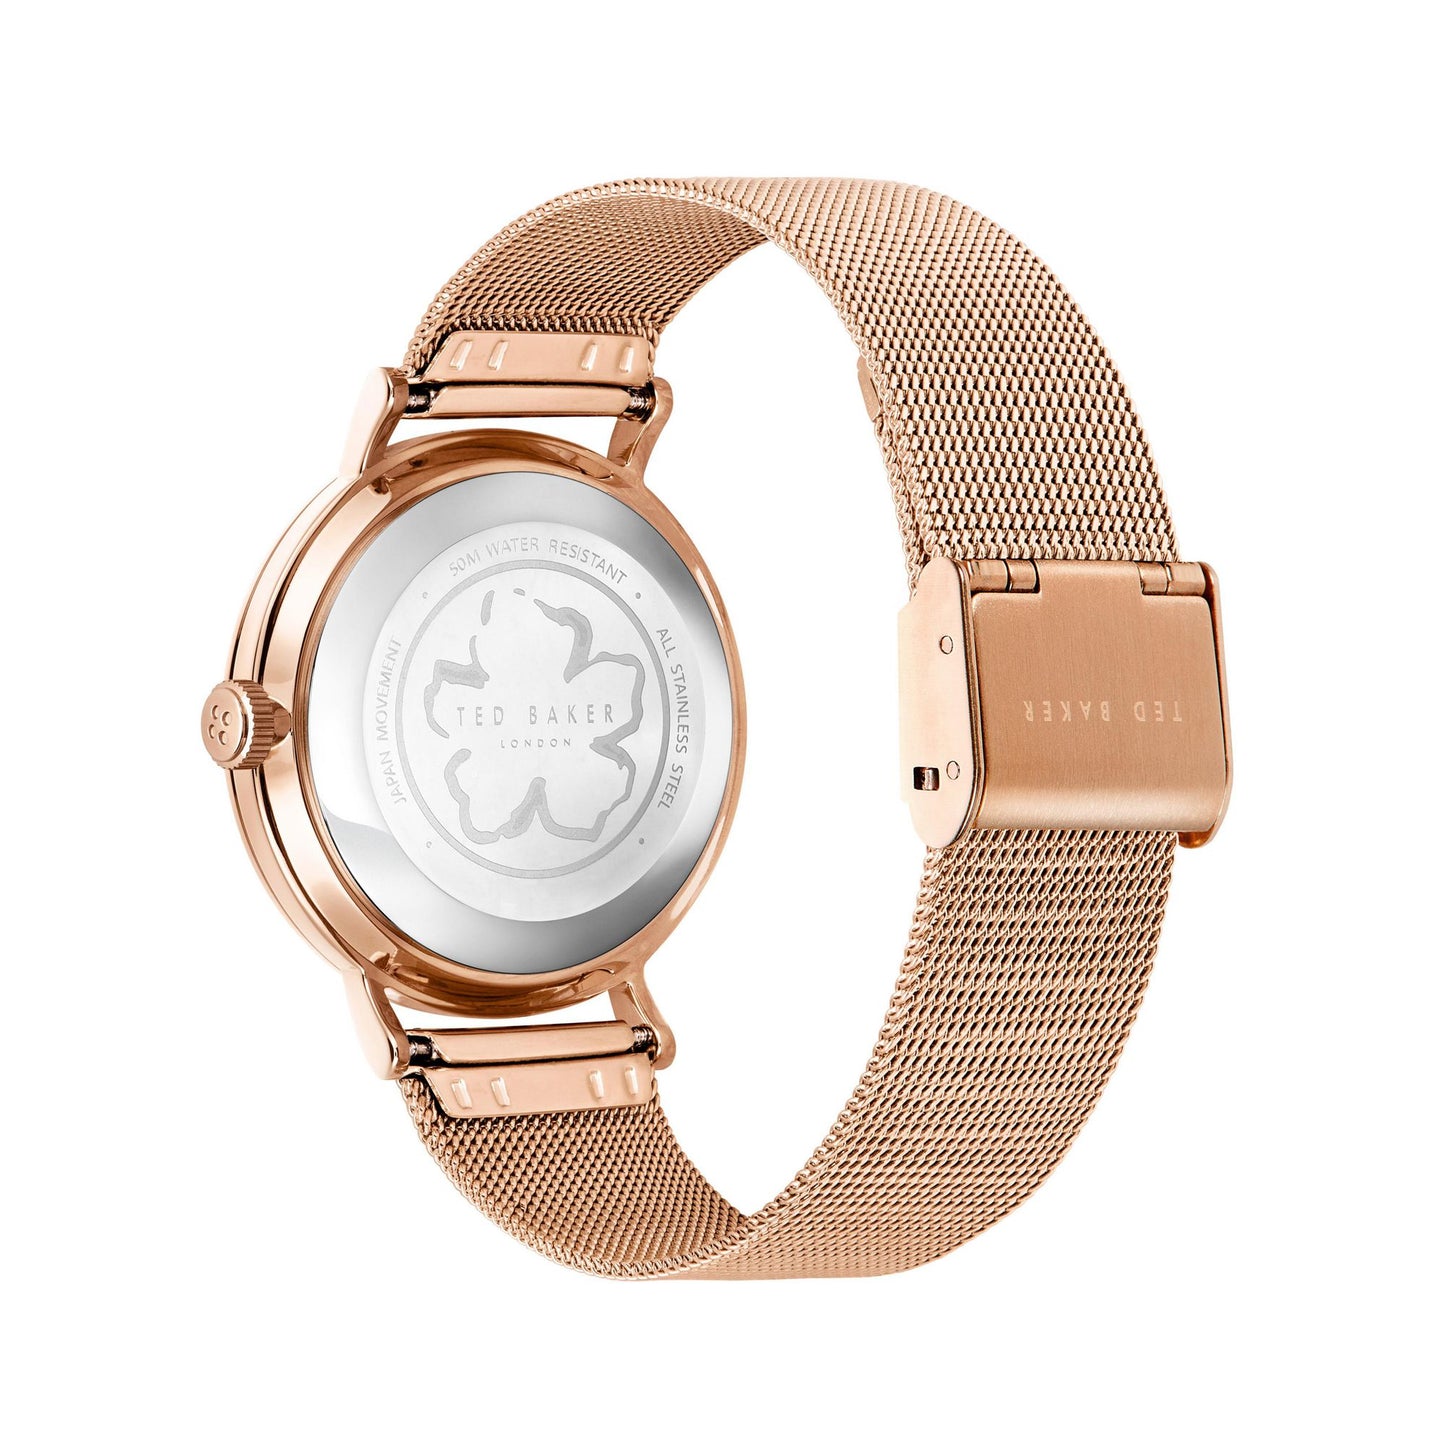 Ted Baker Champagne Dial Women Watch - BKPPHS237